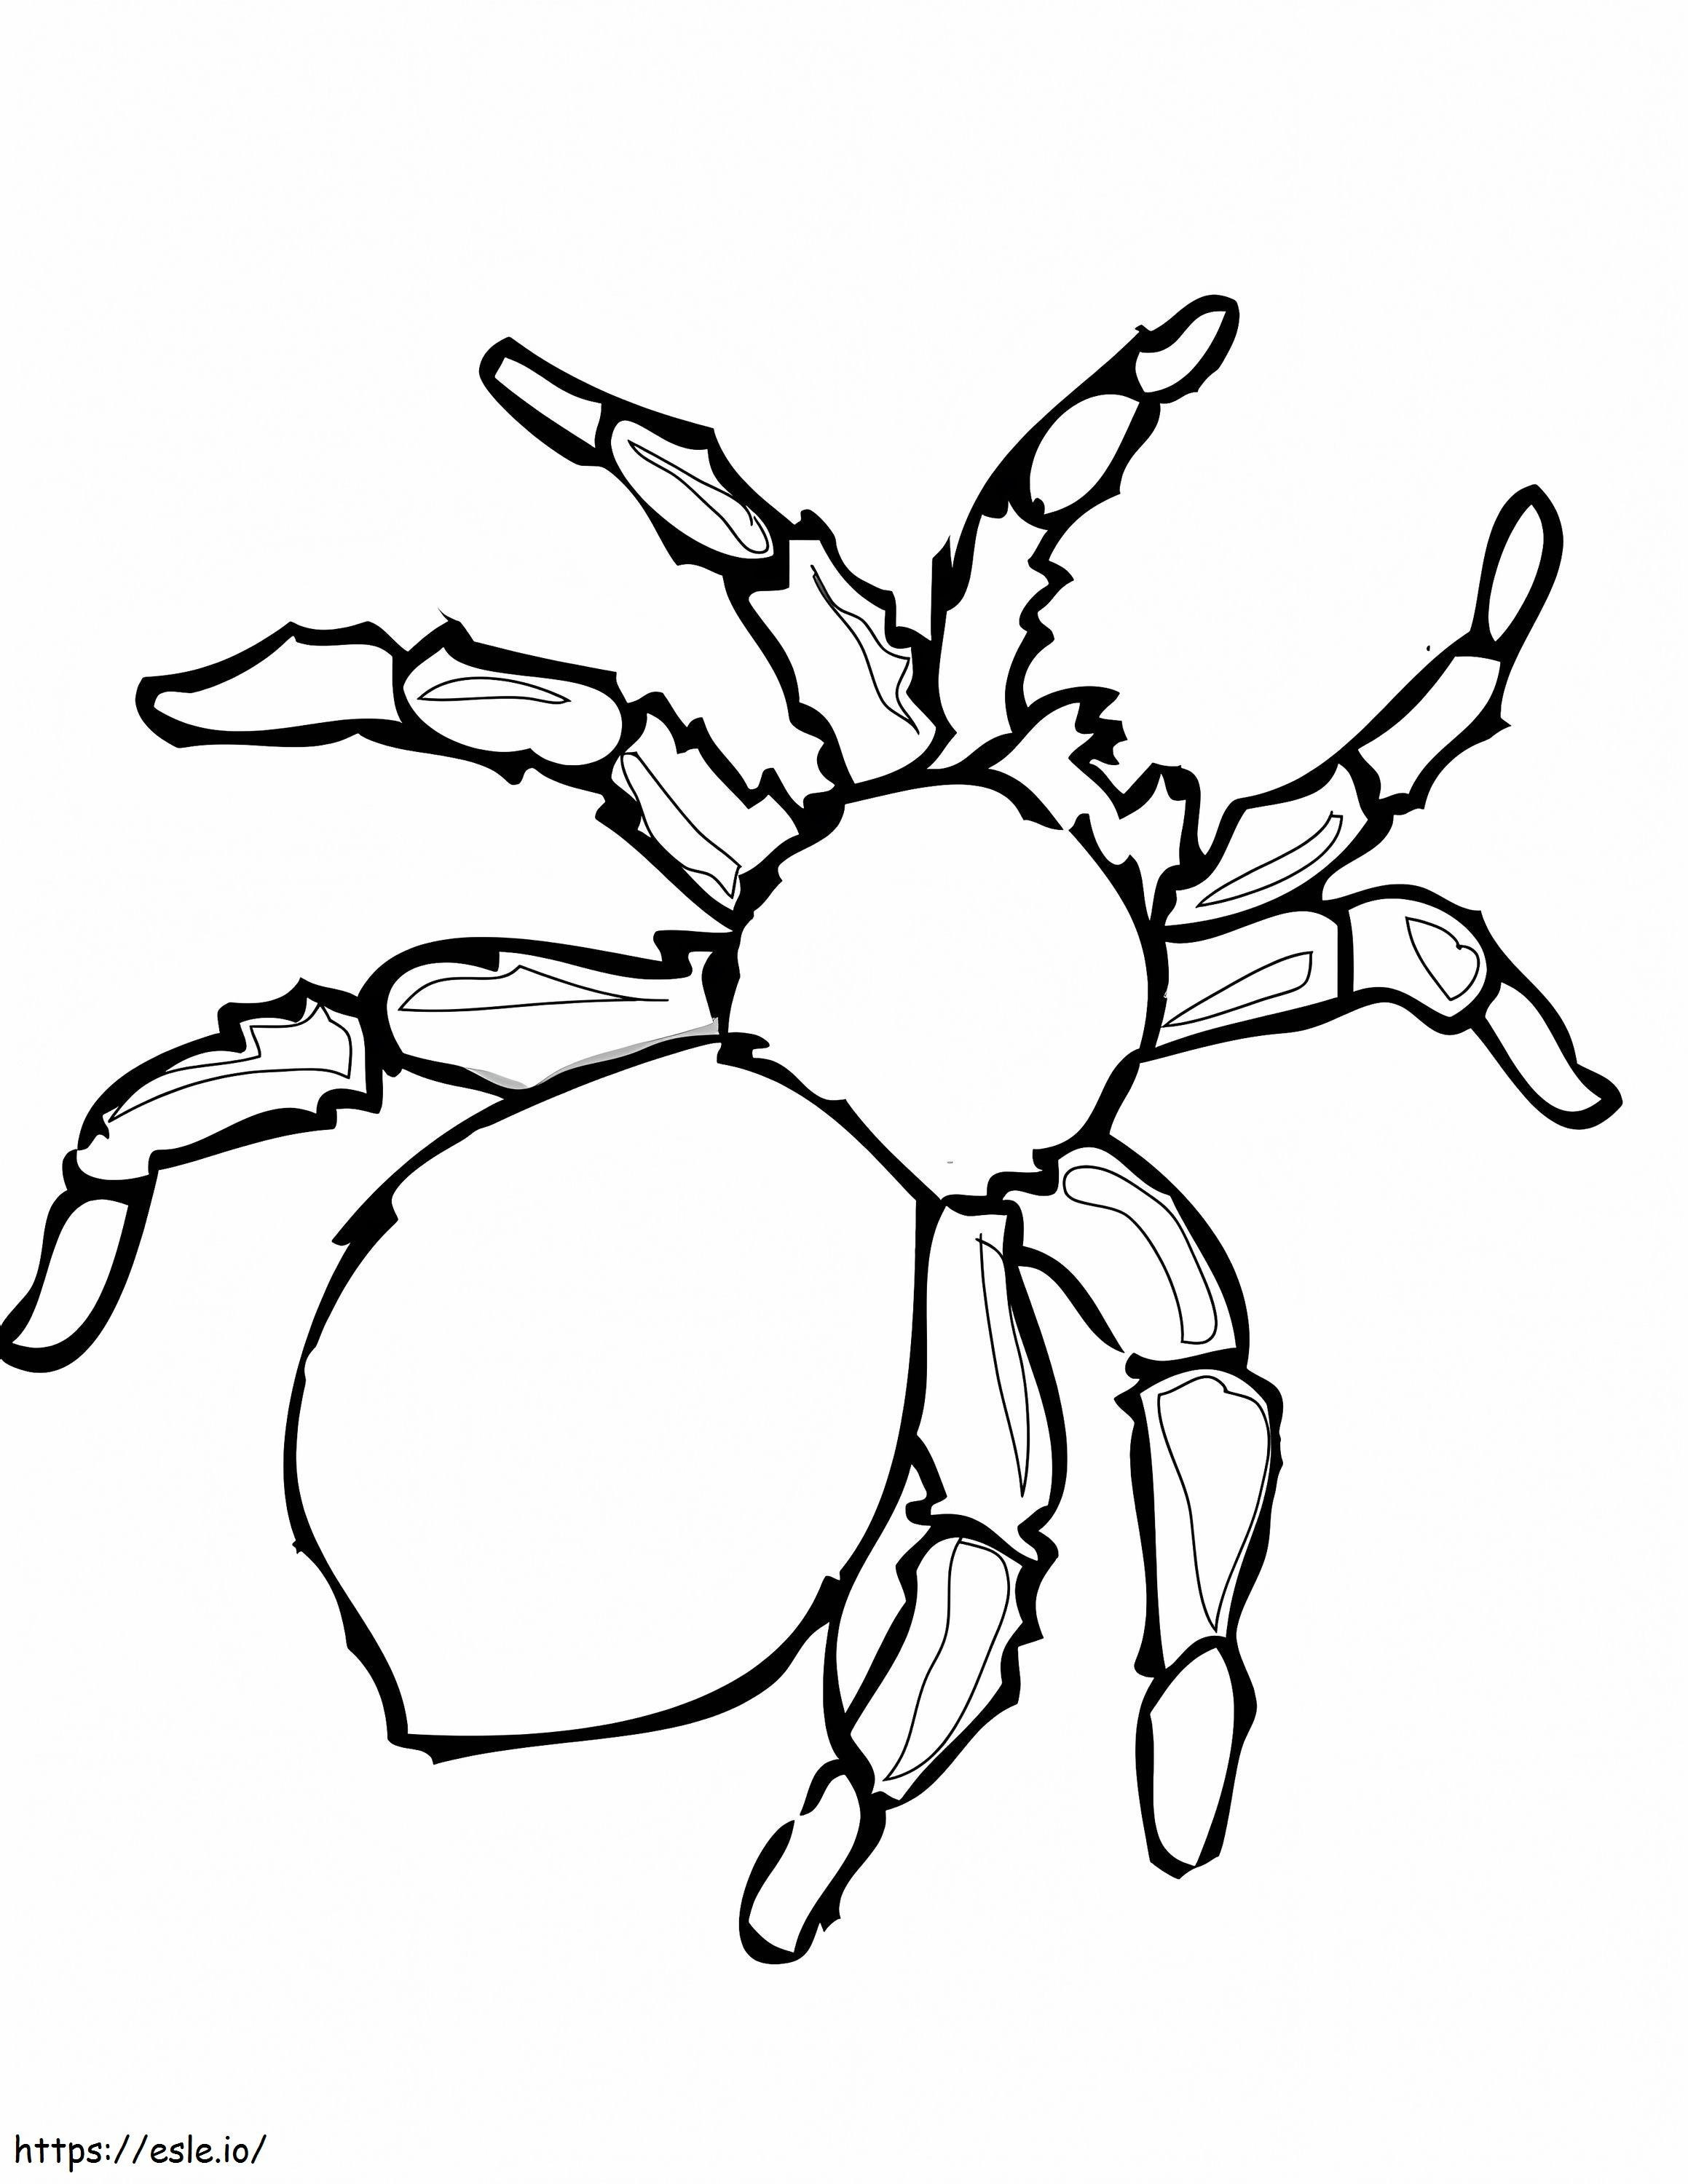 Spider 6 coloring page